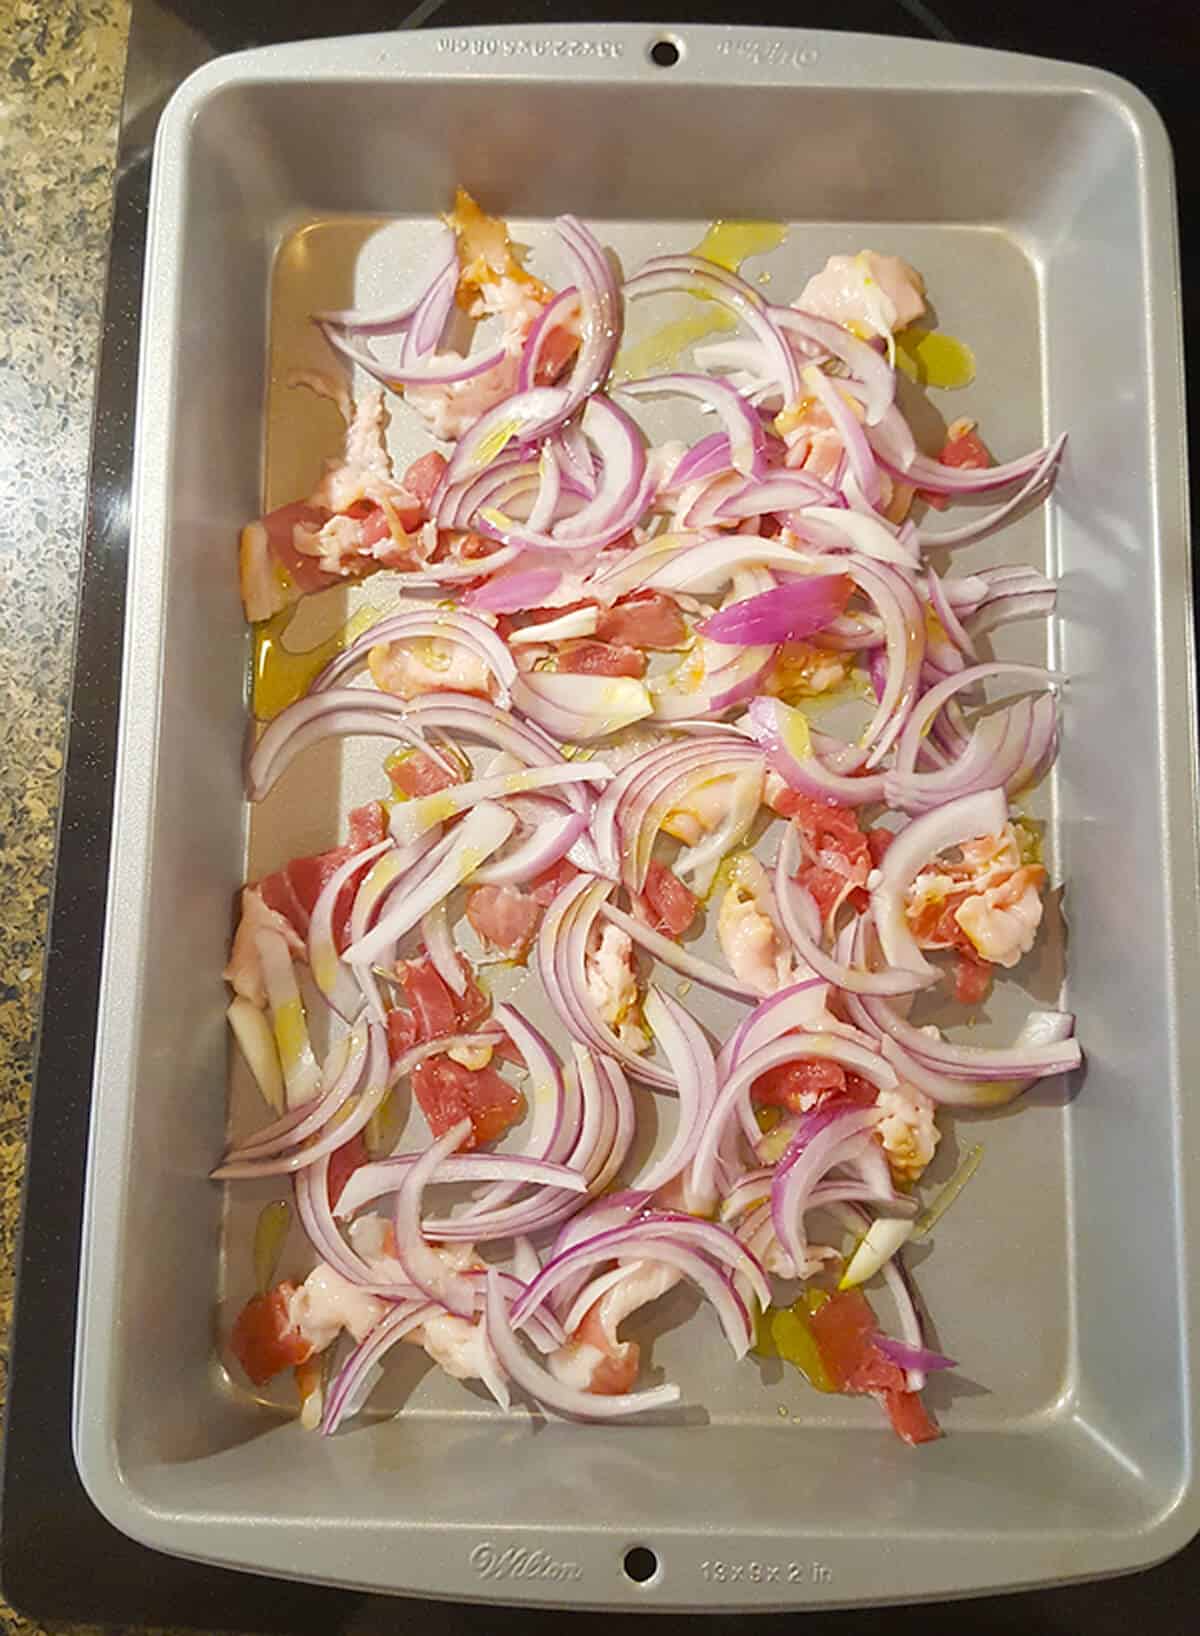 Bacon, onion, and olive oil in a baking pan.